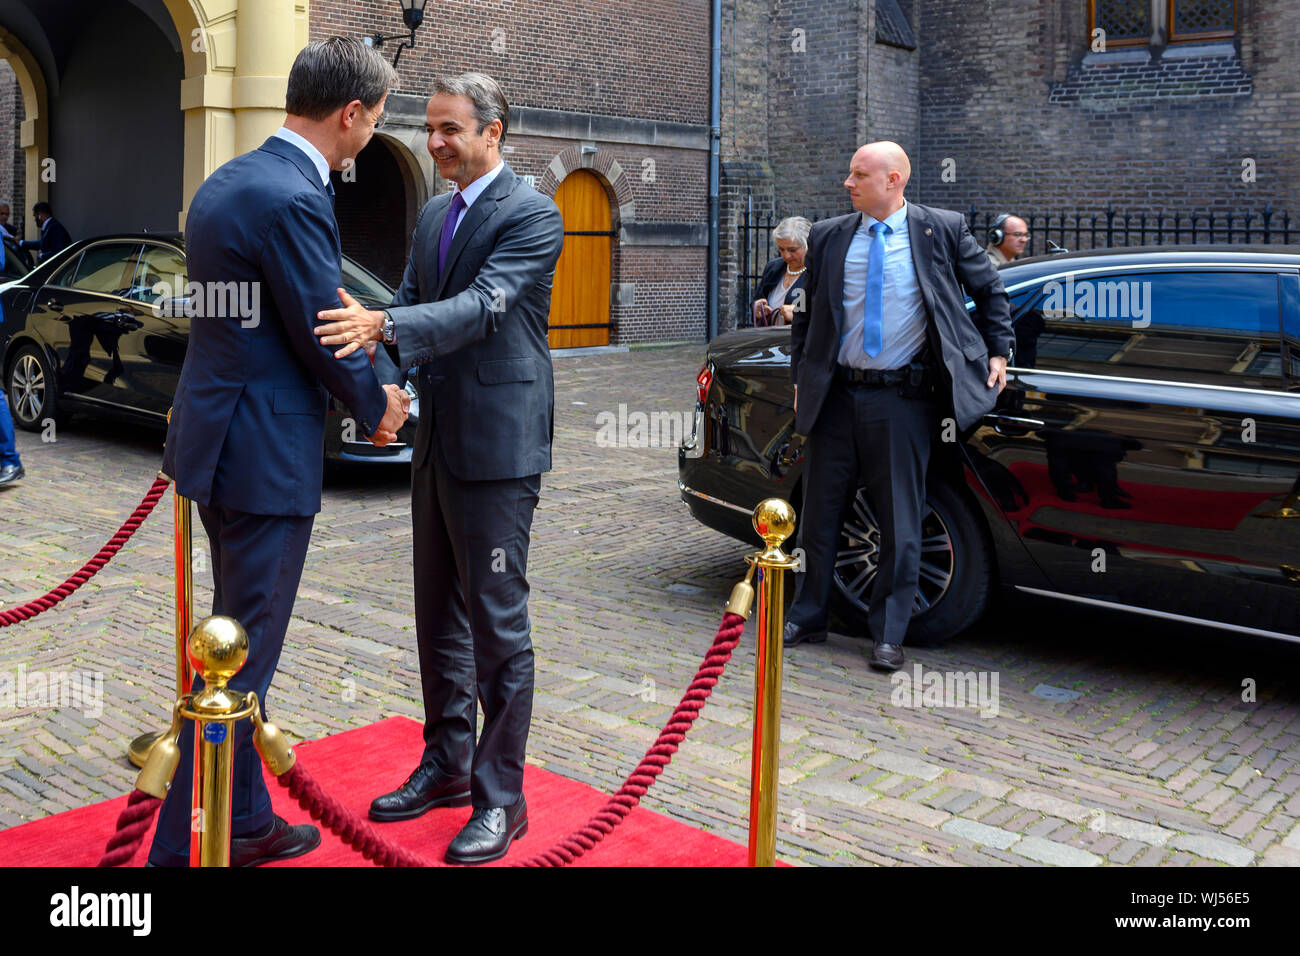 The Hague, Netherlands September 3rd, 2019 - Prime Minister Mark Rutte will receive Greek Prime Minister Kyriákos Mitsotákis for an introduction to the Ministry of General Affairs. The two heads of government first meet in the Torentje, followed by a wider delegation meeting during a working lunch in the Statenzaal. The agenda includes bilateral relations between Greece and the Netherlands, the reform program of the new Greek government, migration and current events on the European agenda. After that they have the Press Conference. Stock Photo